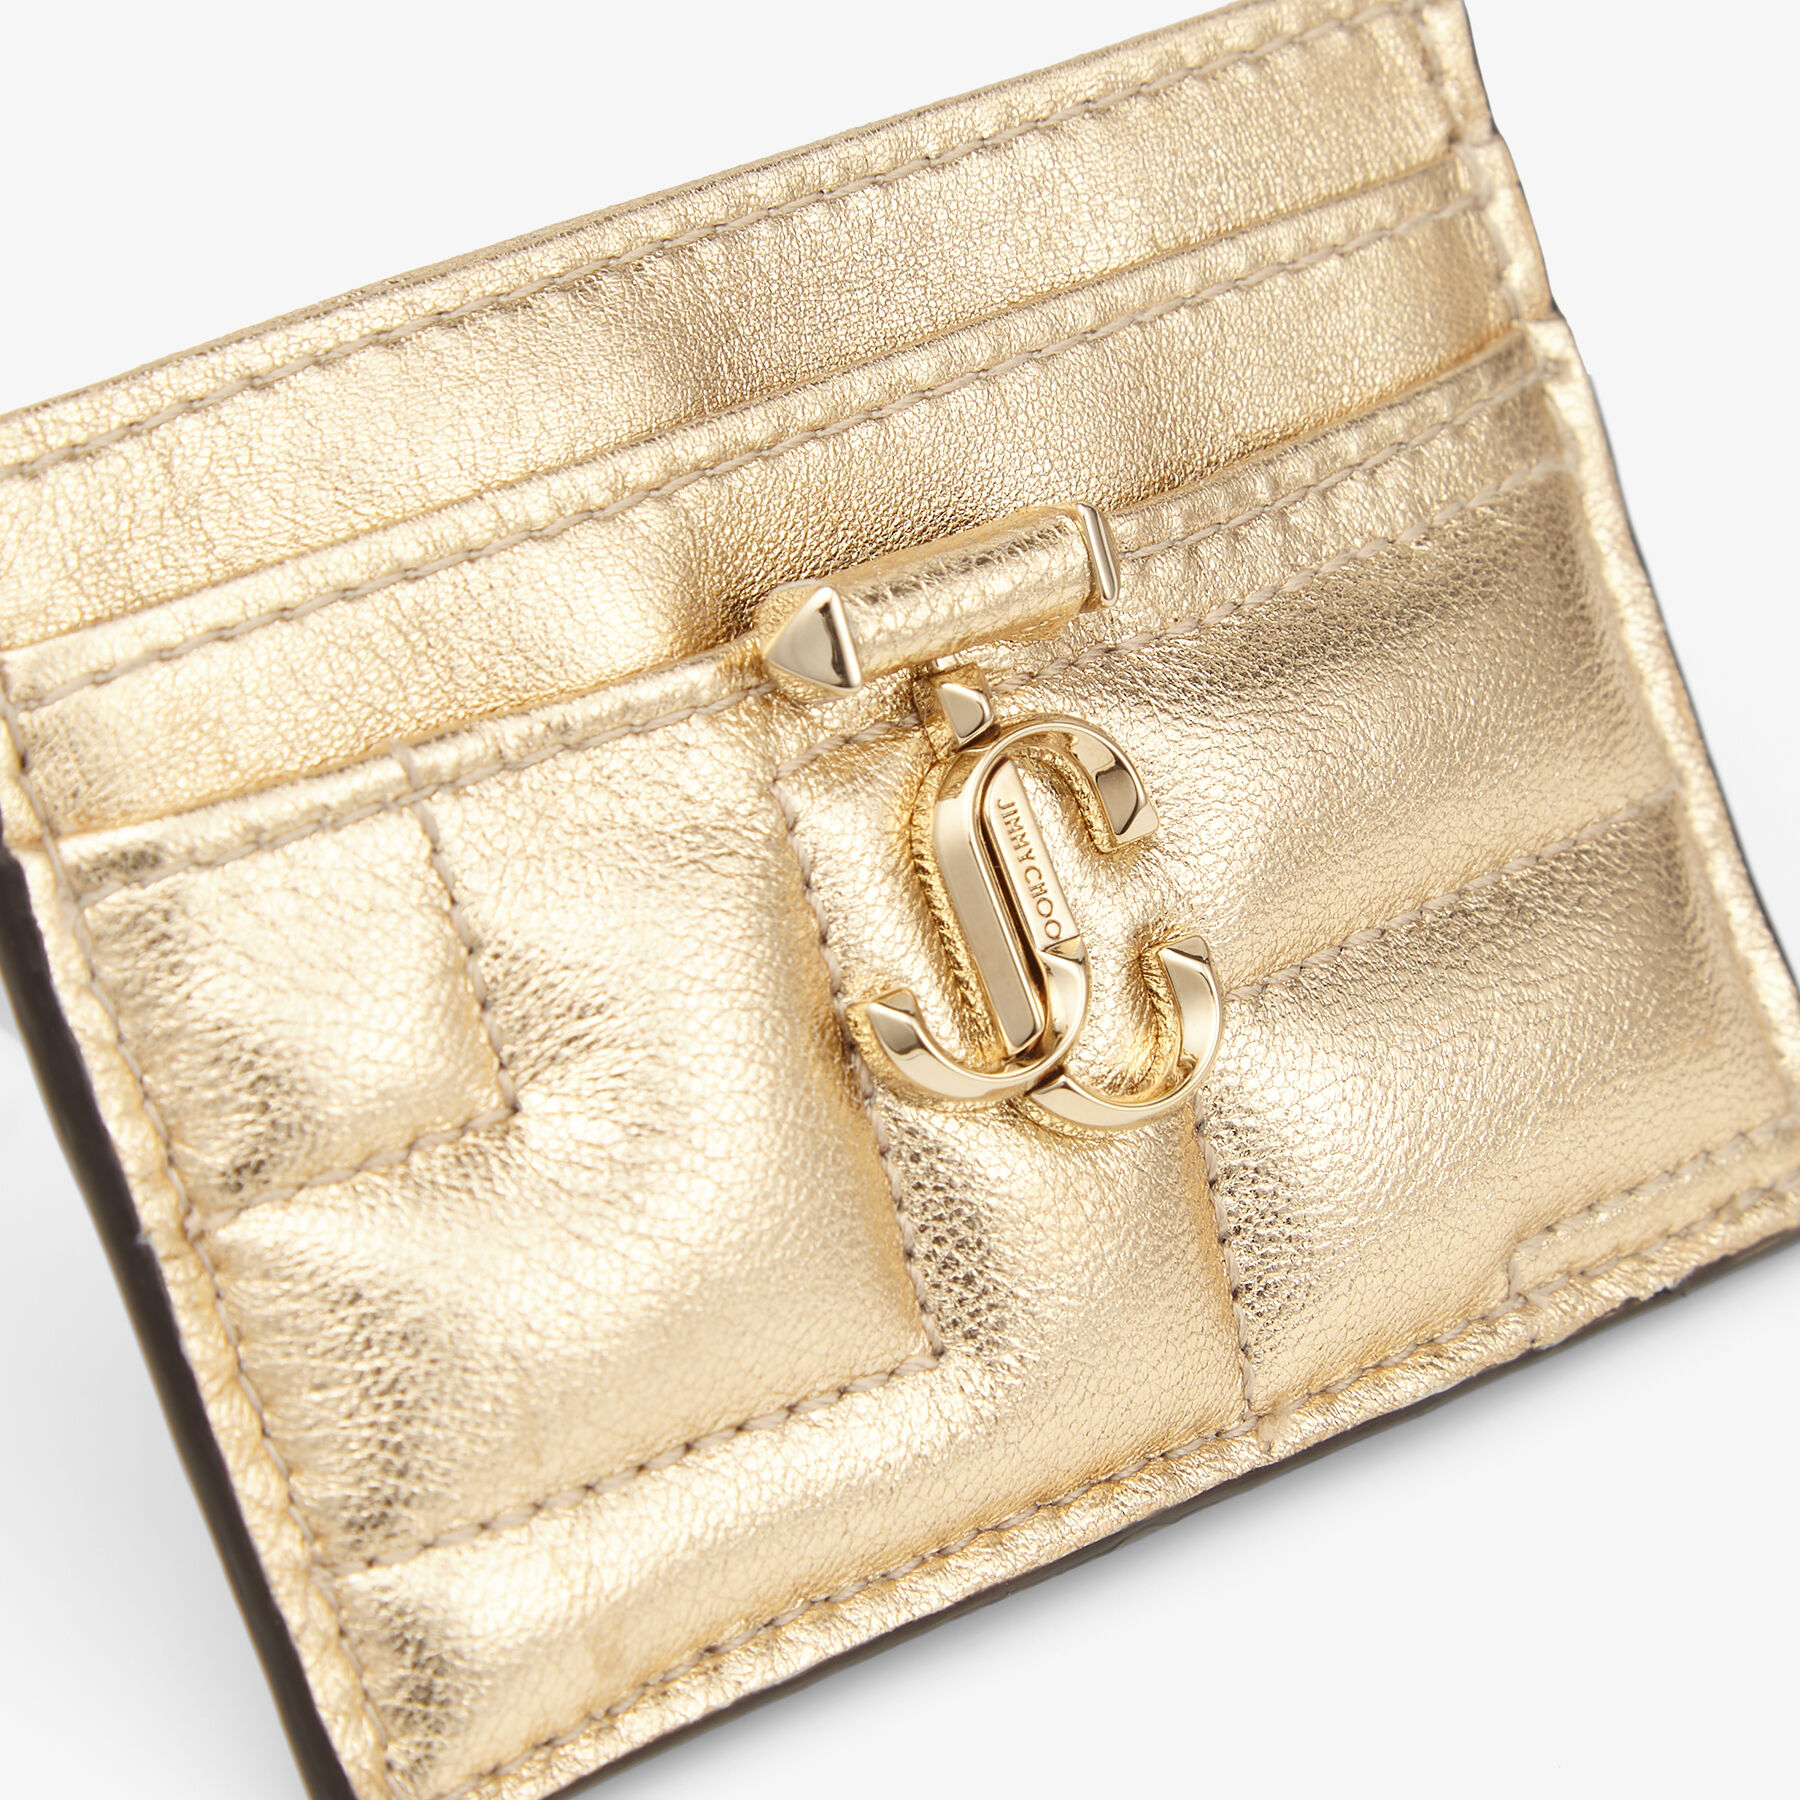 Gold Avenue Metallic Nappa Leather Card Holder with JC Emblem